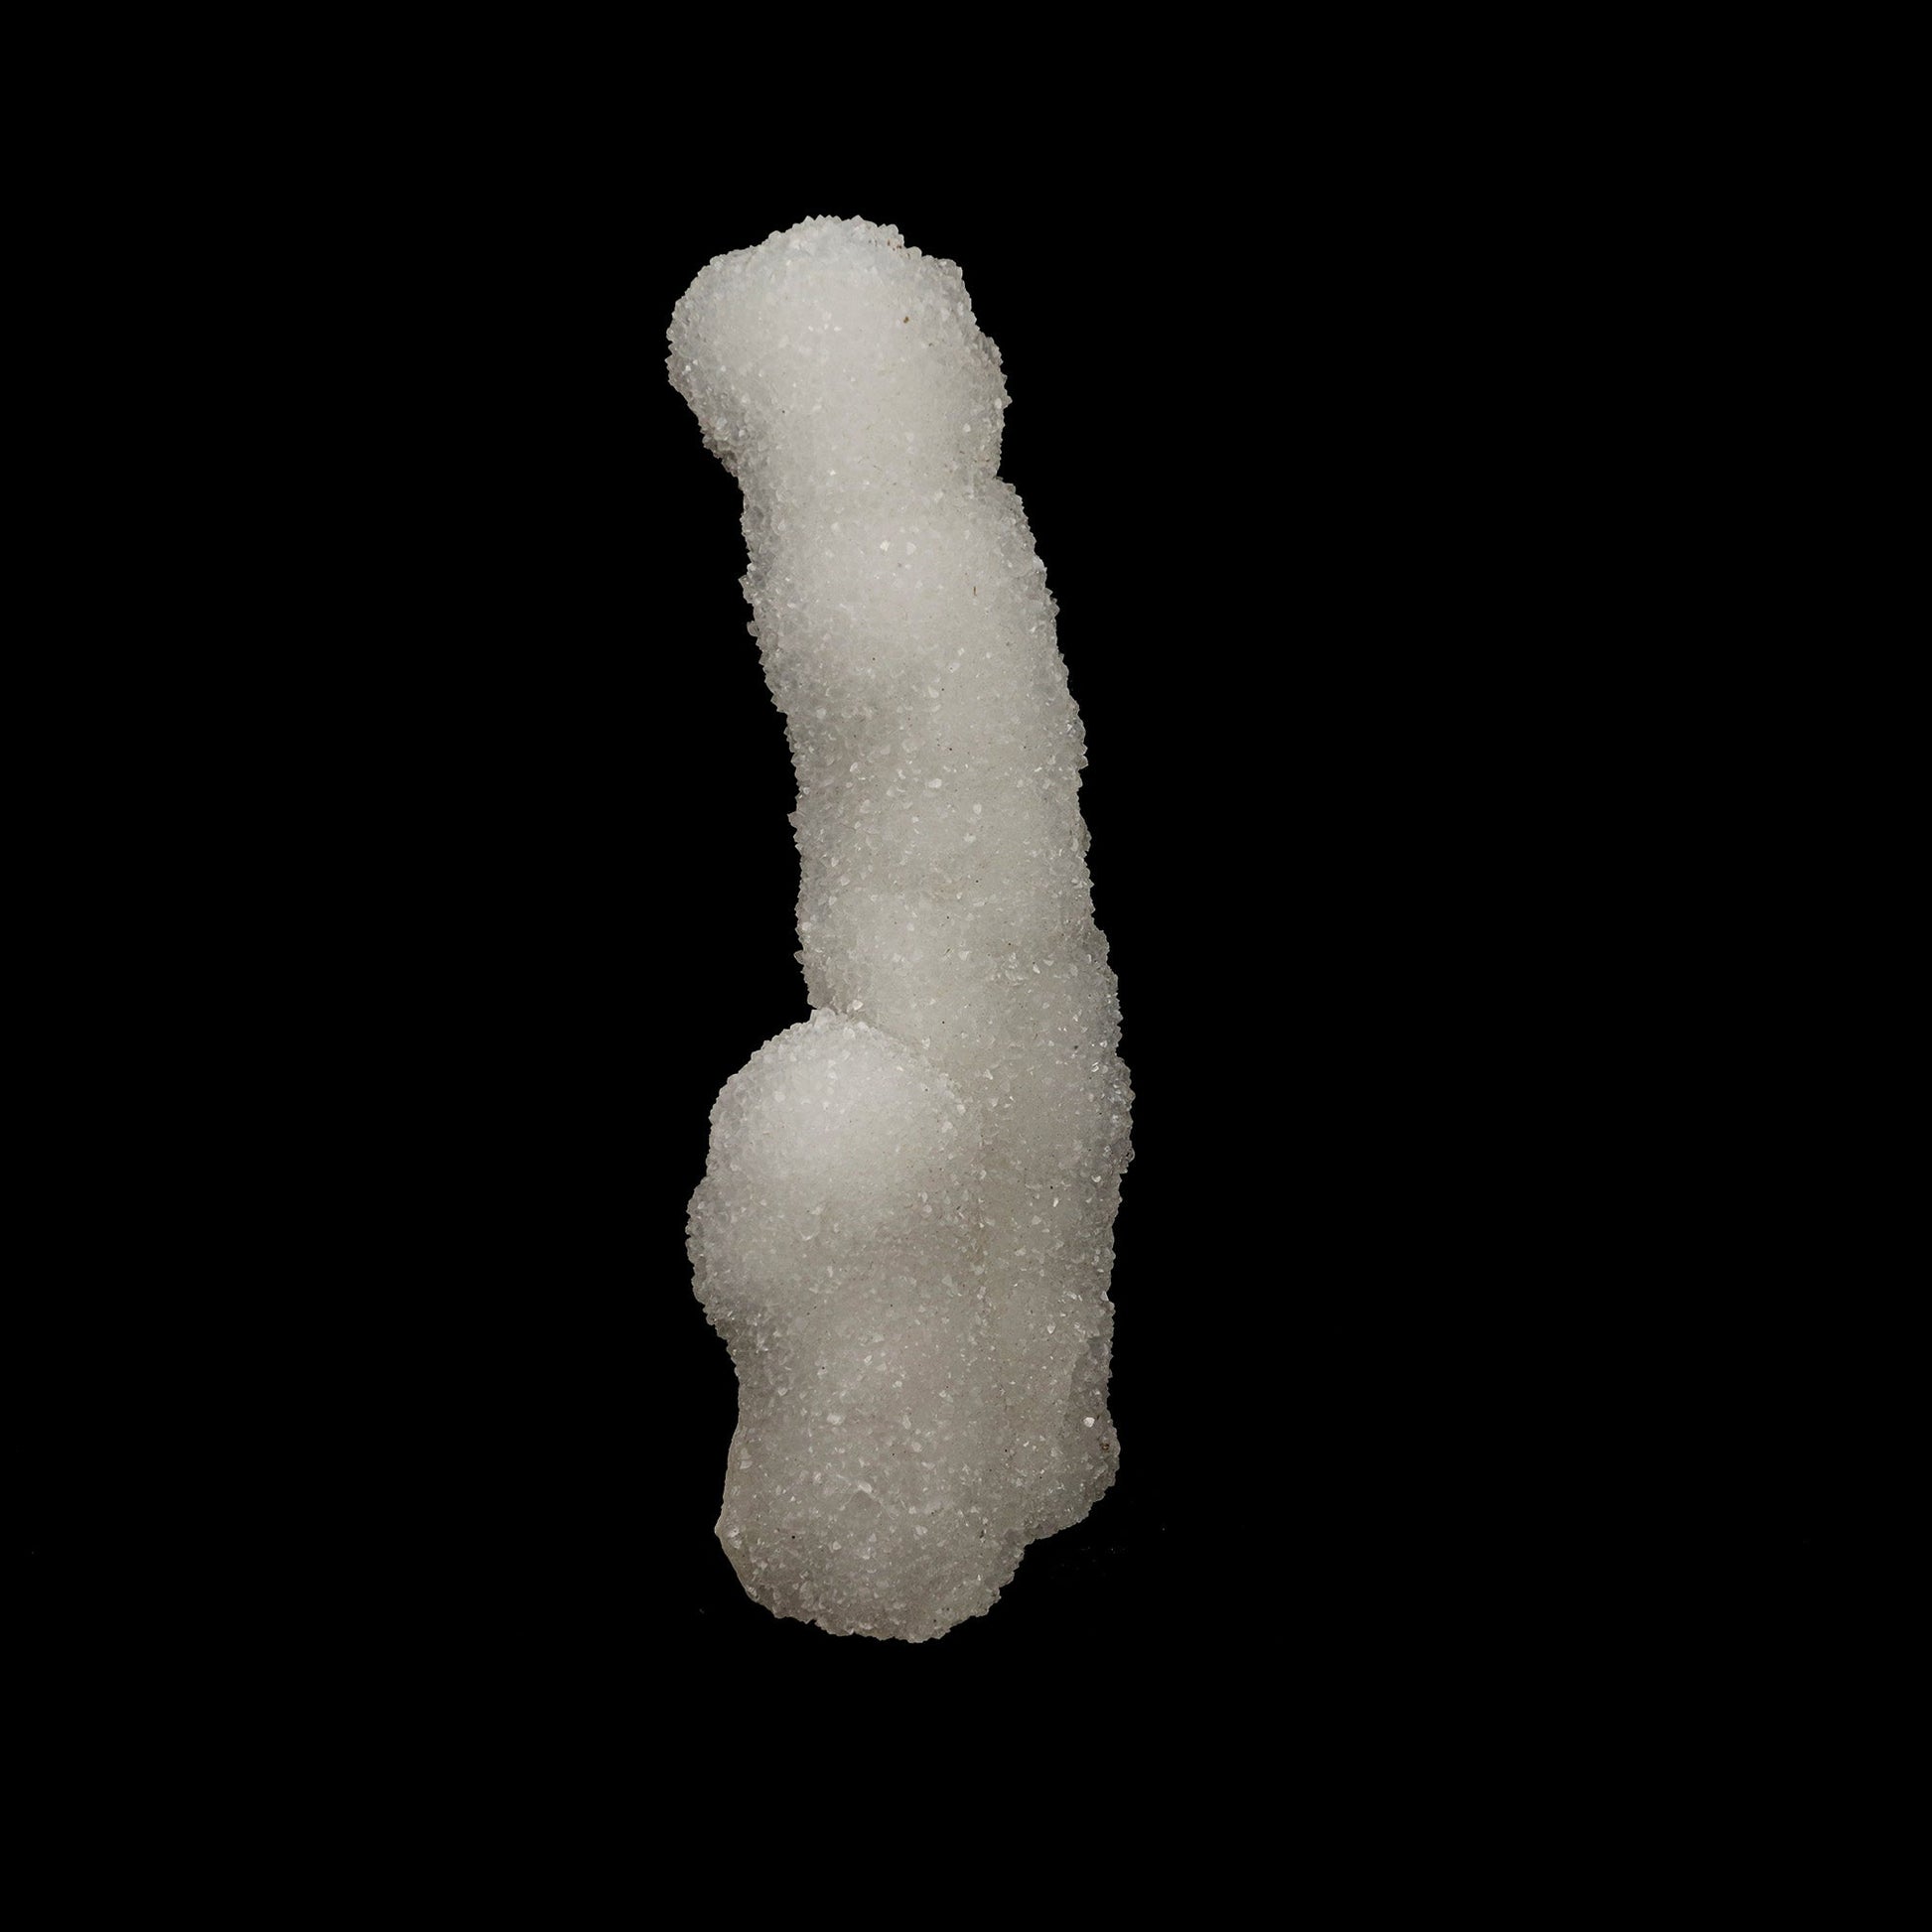 Sprakling MM Quartz Stalactite Natural Mineral Specimen # B 5236  https://www.superbminerals.us/products/sprakling-mm-quartz-stalactite-natural-mineral-specimen-b-5236  Features: It is encrusted with bright white, microcrystalline Quartz crystals inside a glossy, lustrous covering of Apophyllite crystals. The lustre, colour, and crystal formation are all impressive. In good condition, it is an impressive and attractive specimen. Primary Mineral(s): MM Quartz